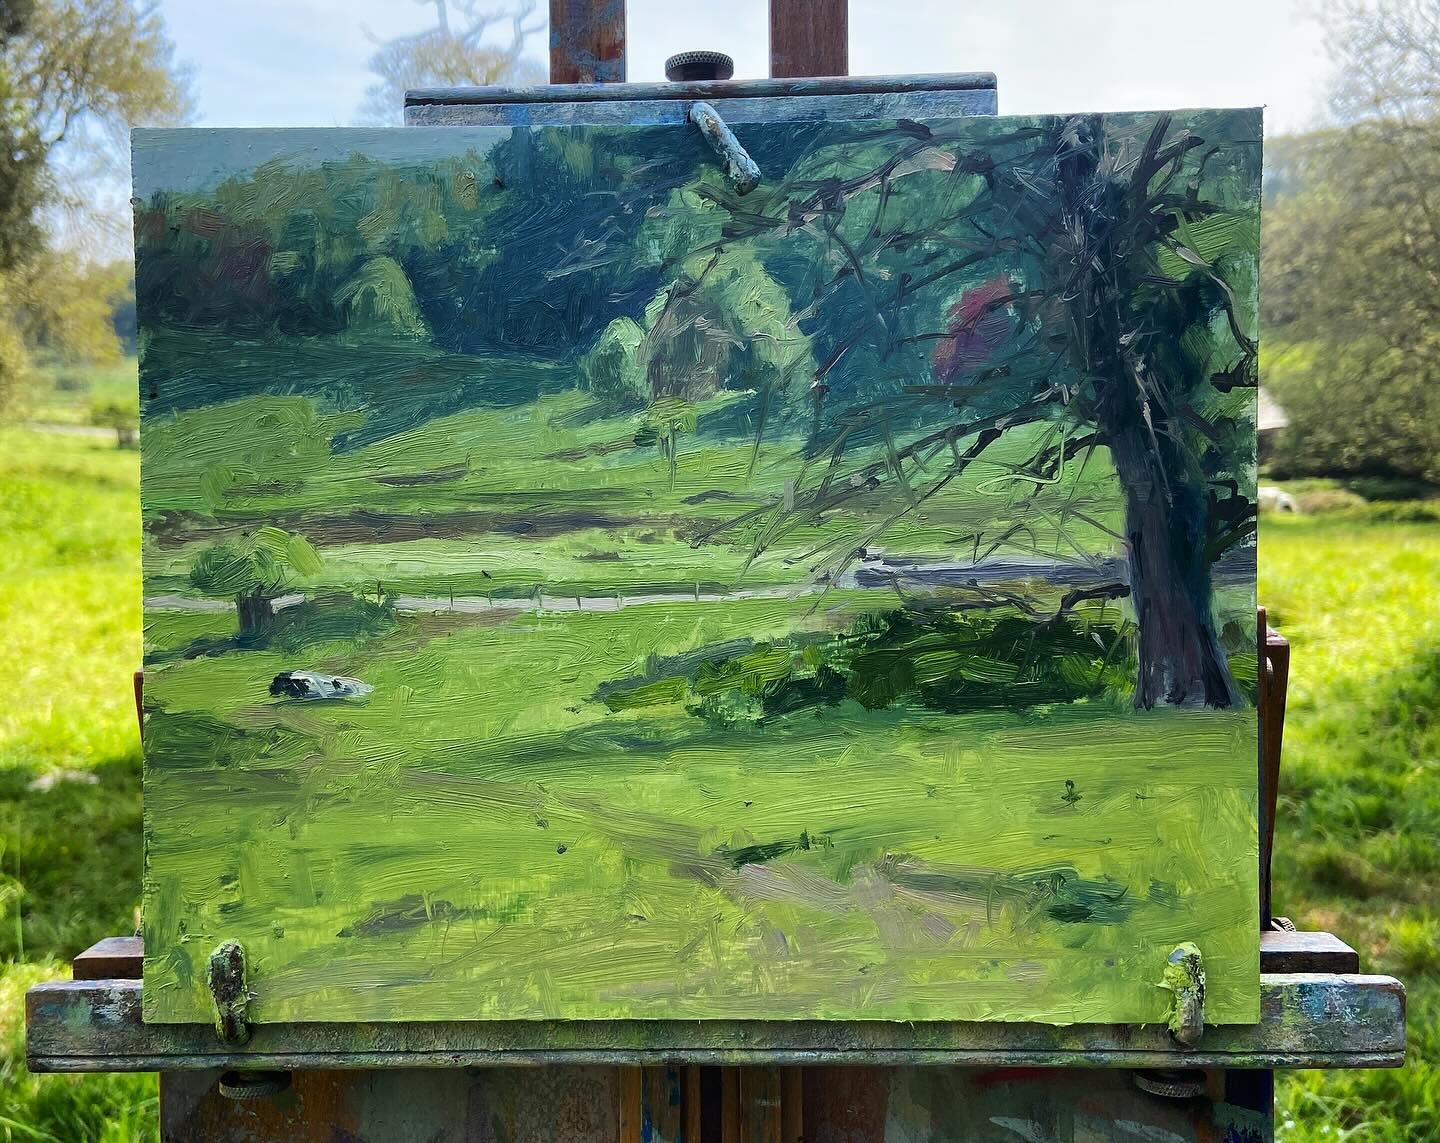 I really enjoyed an afternoon plein air painting at the Penrose Estate. Had some inquisitive cows join me too!
Oil on board - video is on my YouTube channel (link in bio).
.
#pleinairpainting #pleinairpainter #pleinairmag #krowji #andrewbarrowman #an